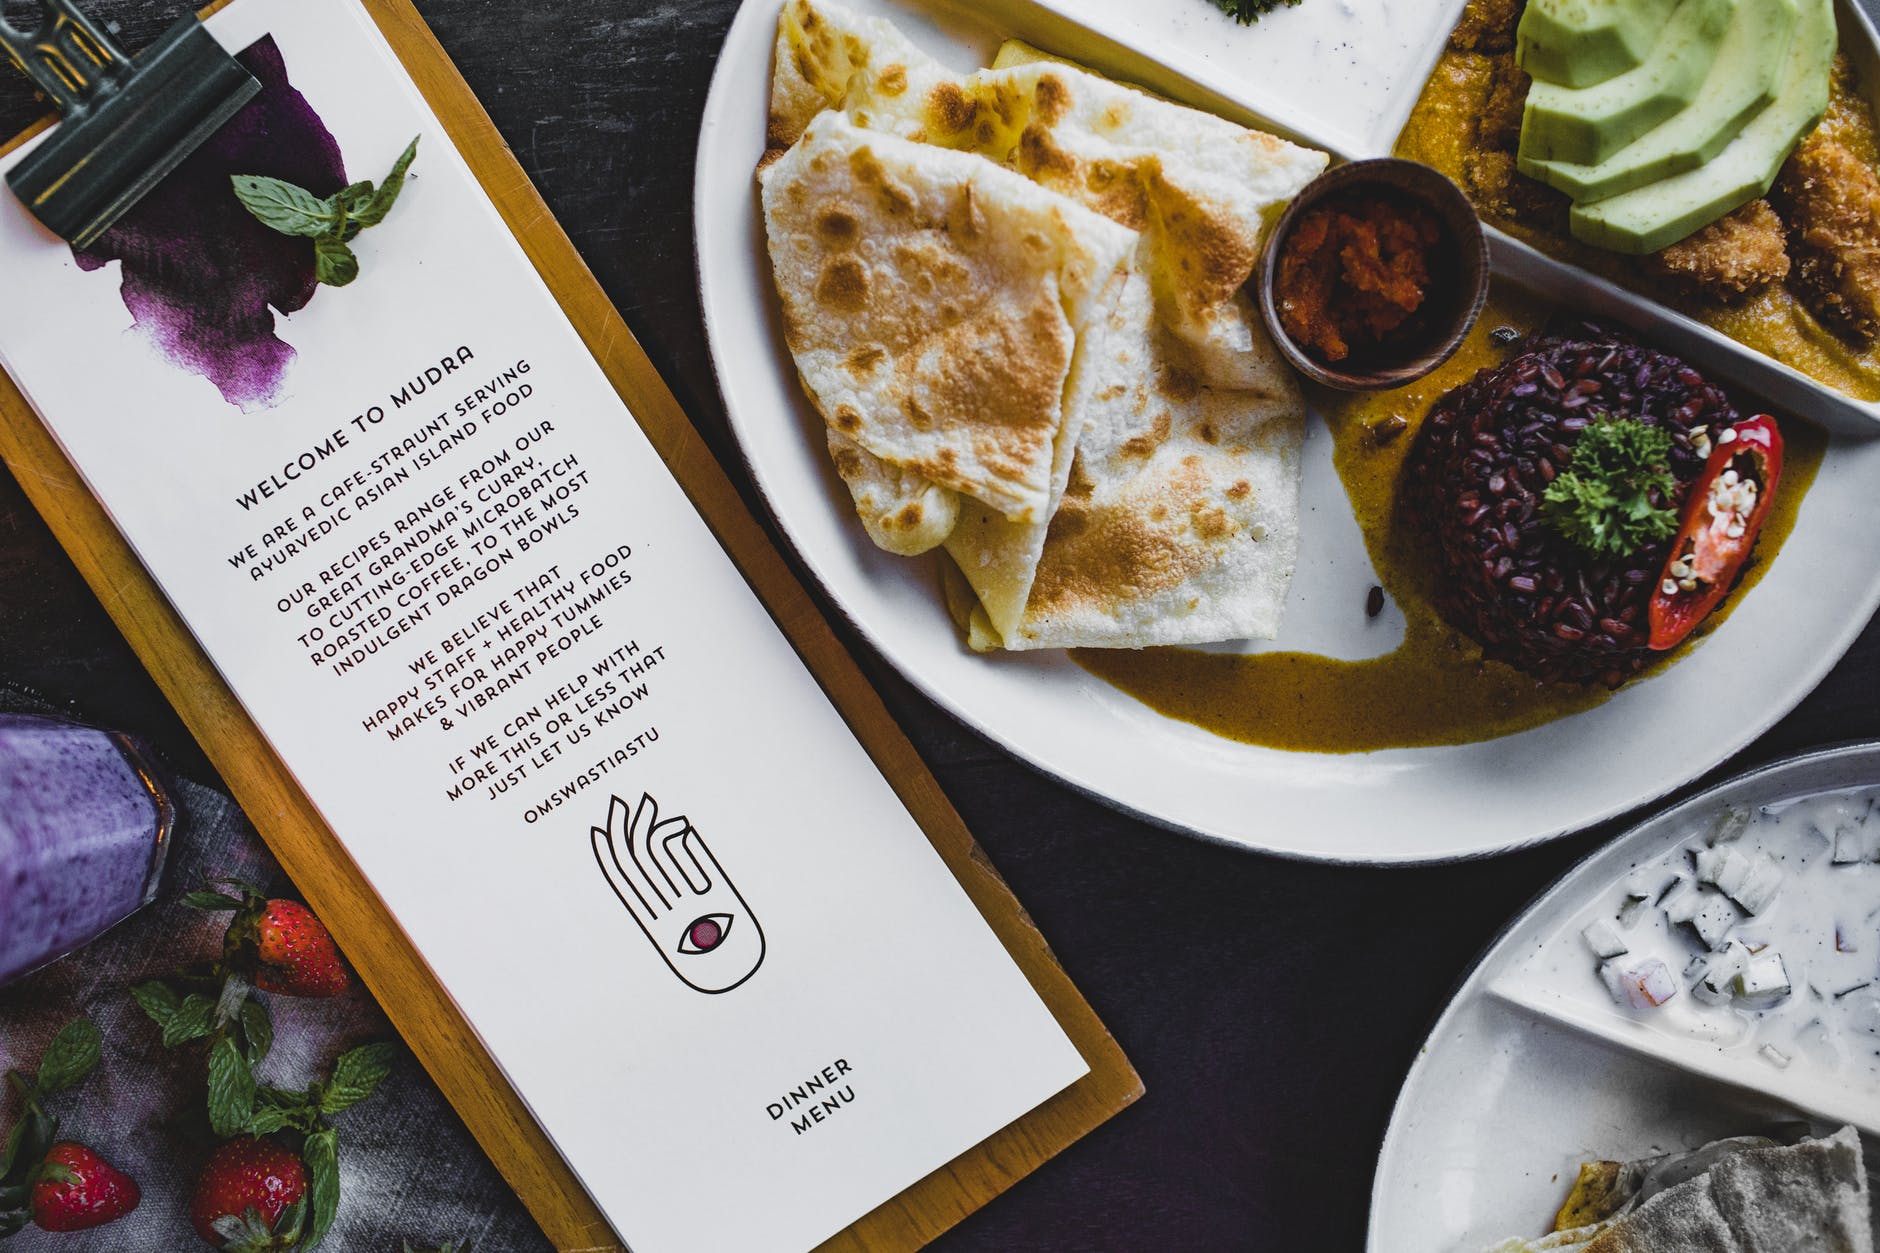 Here are some menu design tips for casual dine-in restaurants